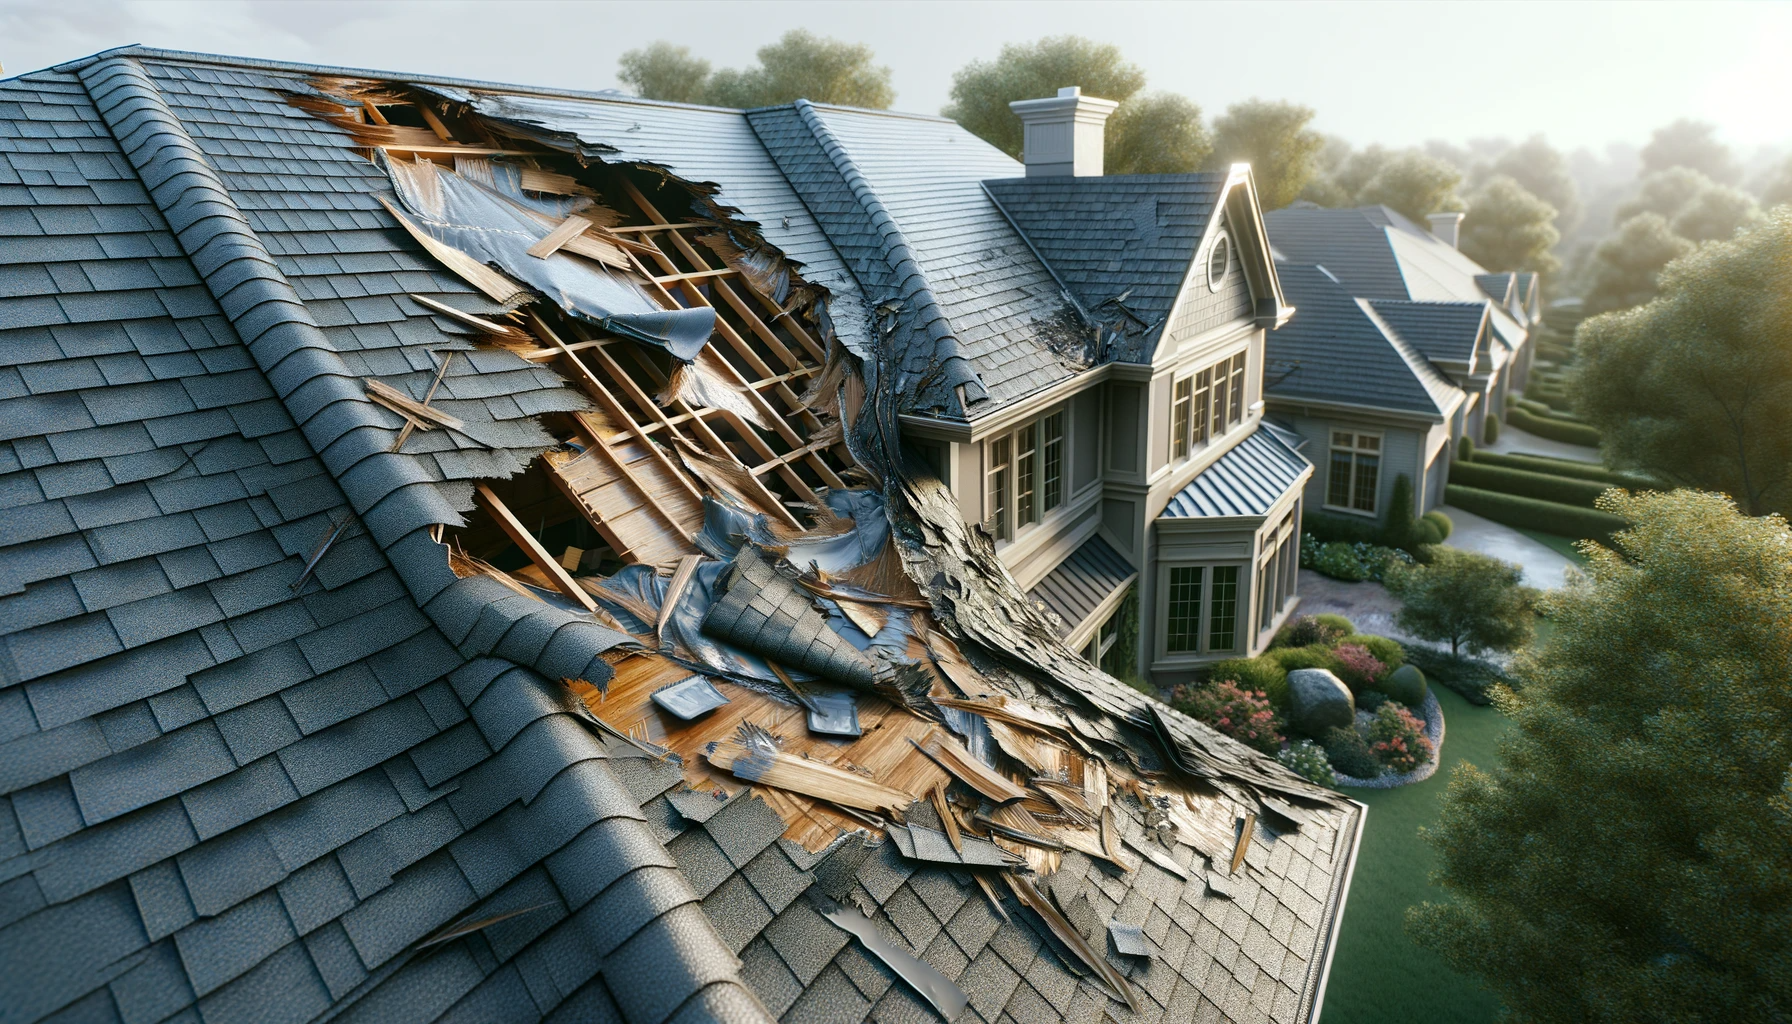 Can You Repair Parts of a Damaged Roof?